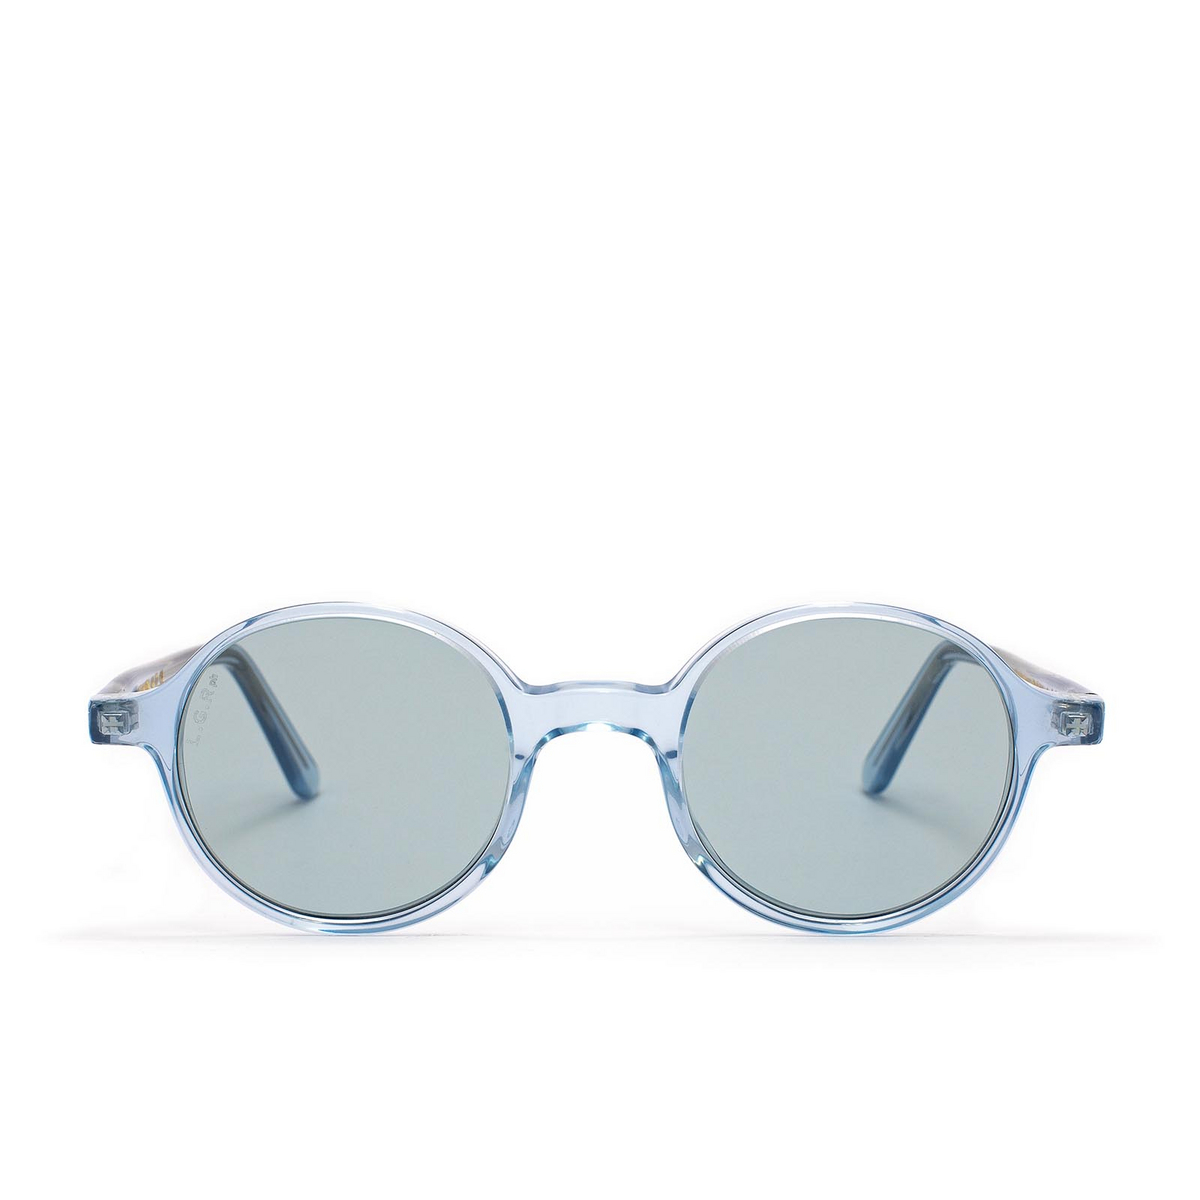 L.G.R® Round Sunglasses: Reunion color Crystal Blue 72 - front view.